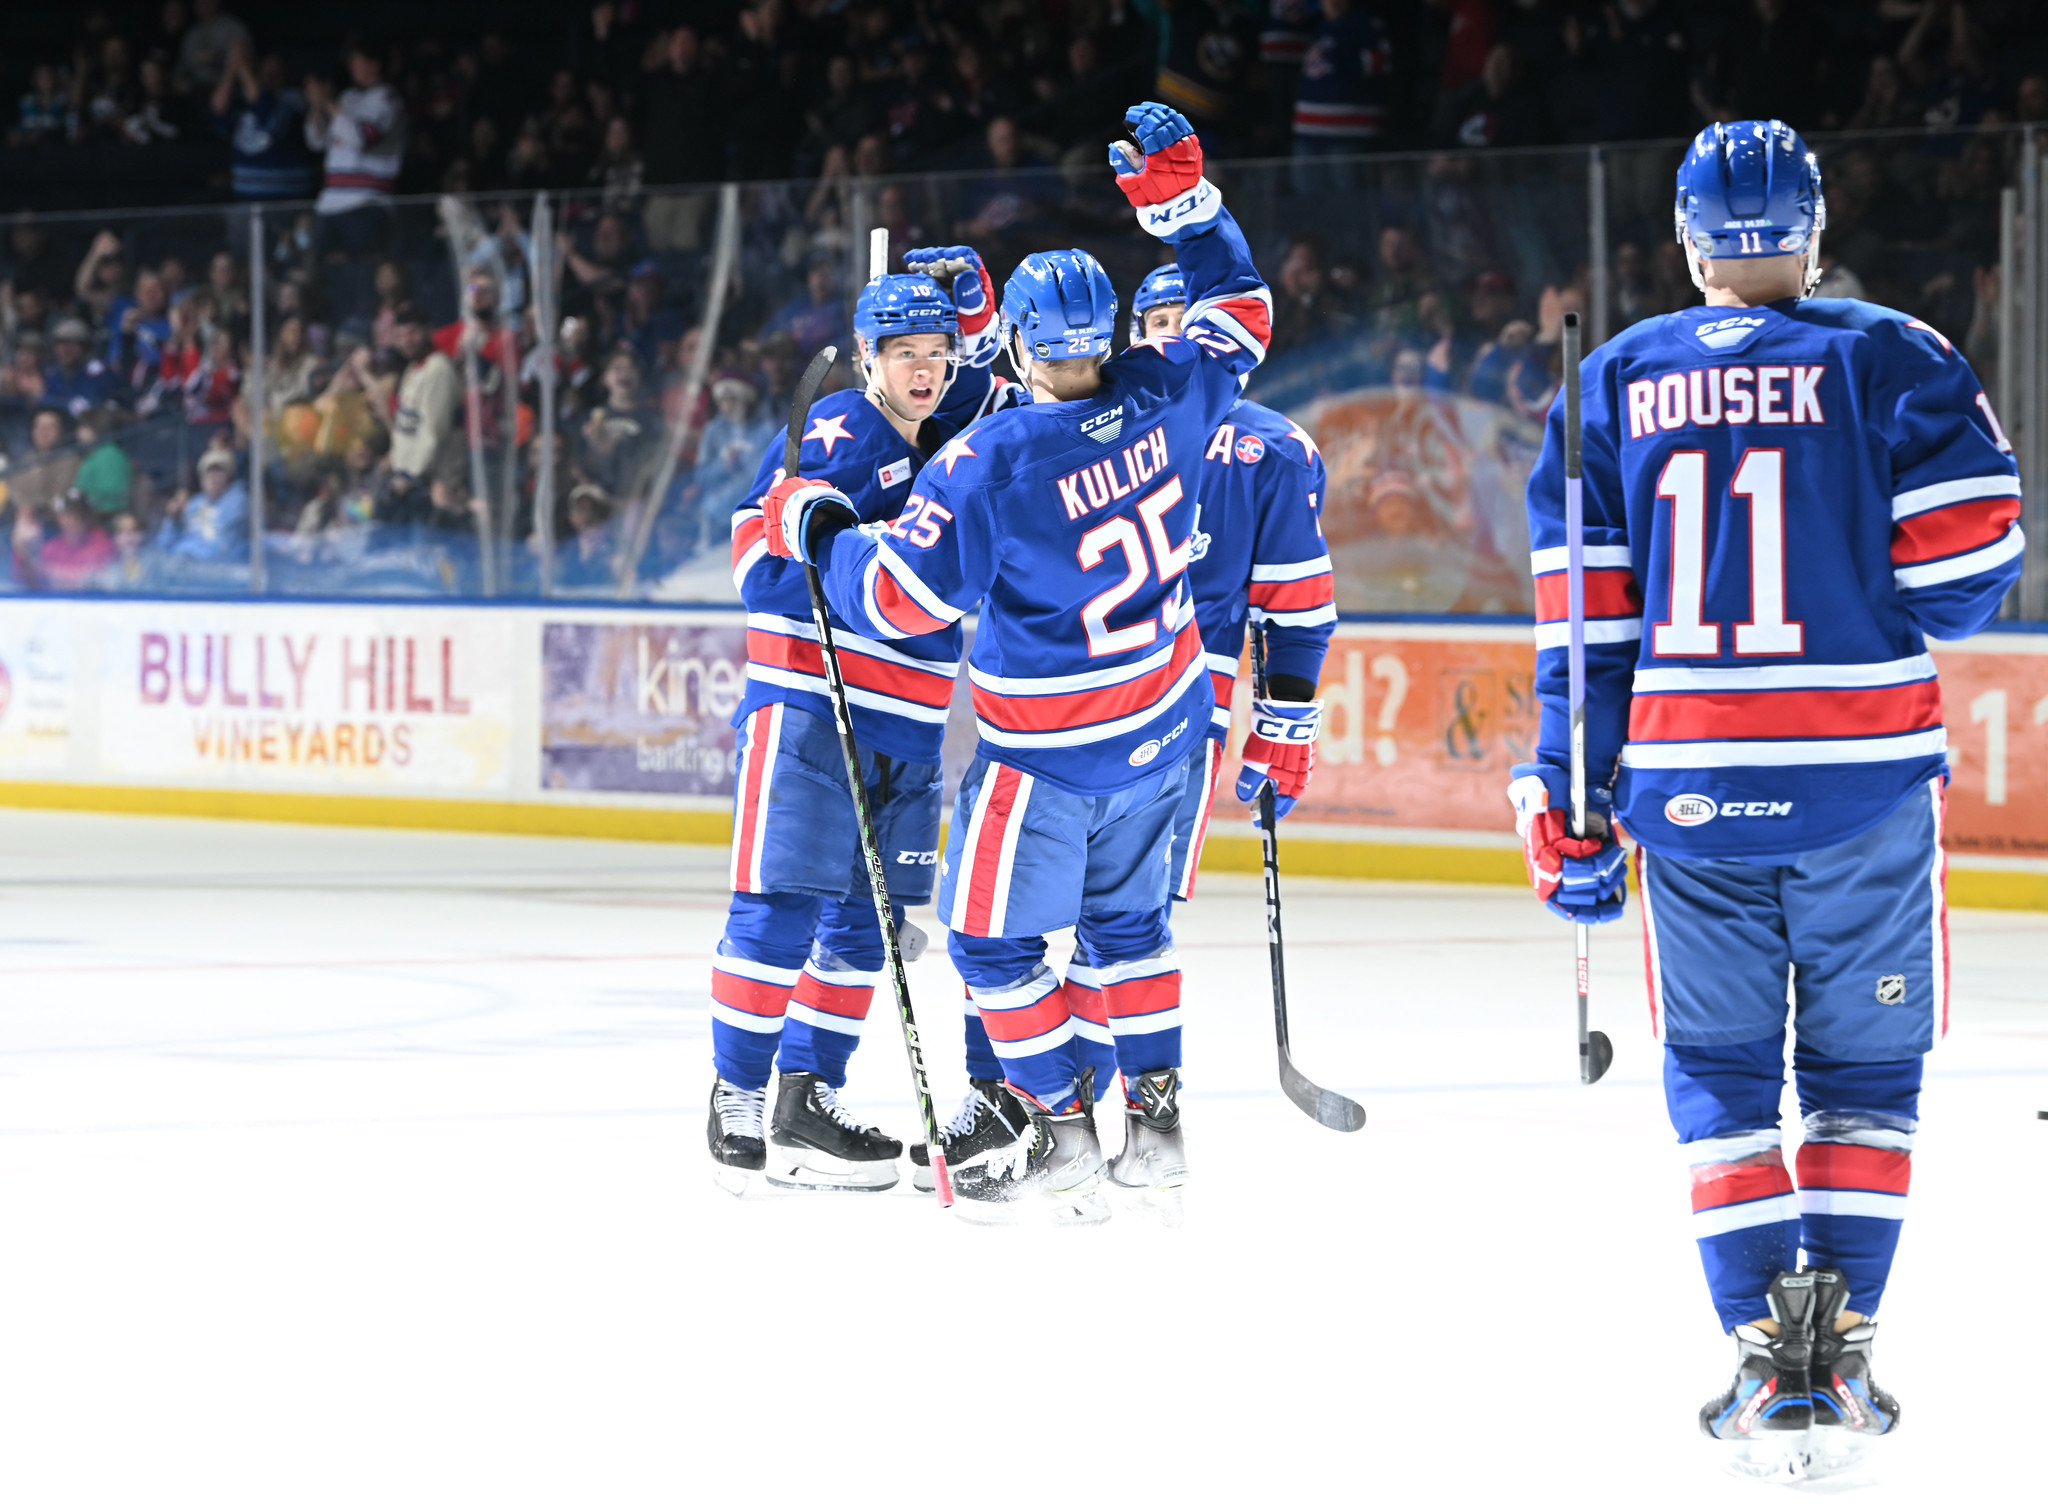 AMERKS HOME TWICE THIS WEEKEND TO CLOSE OUT THE MONTH OF MARCH